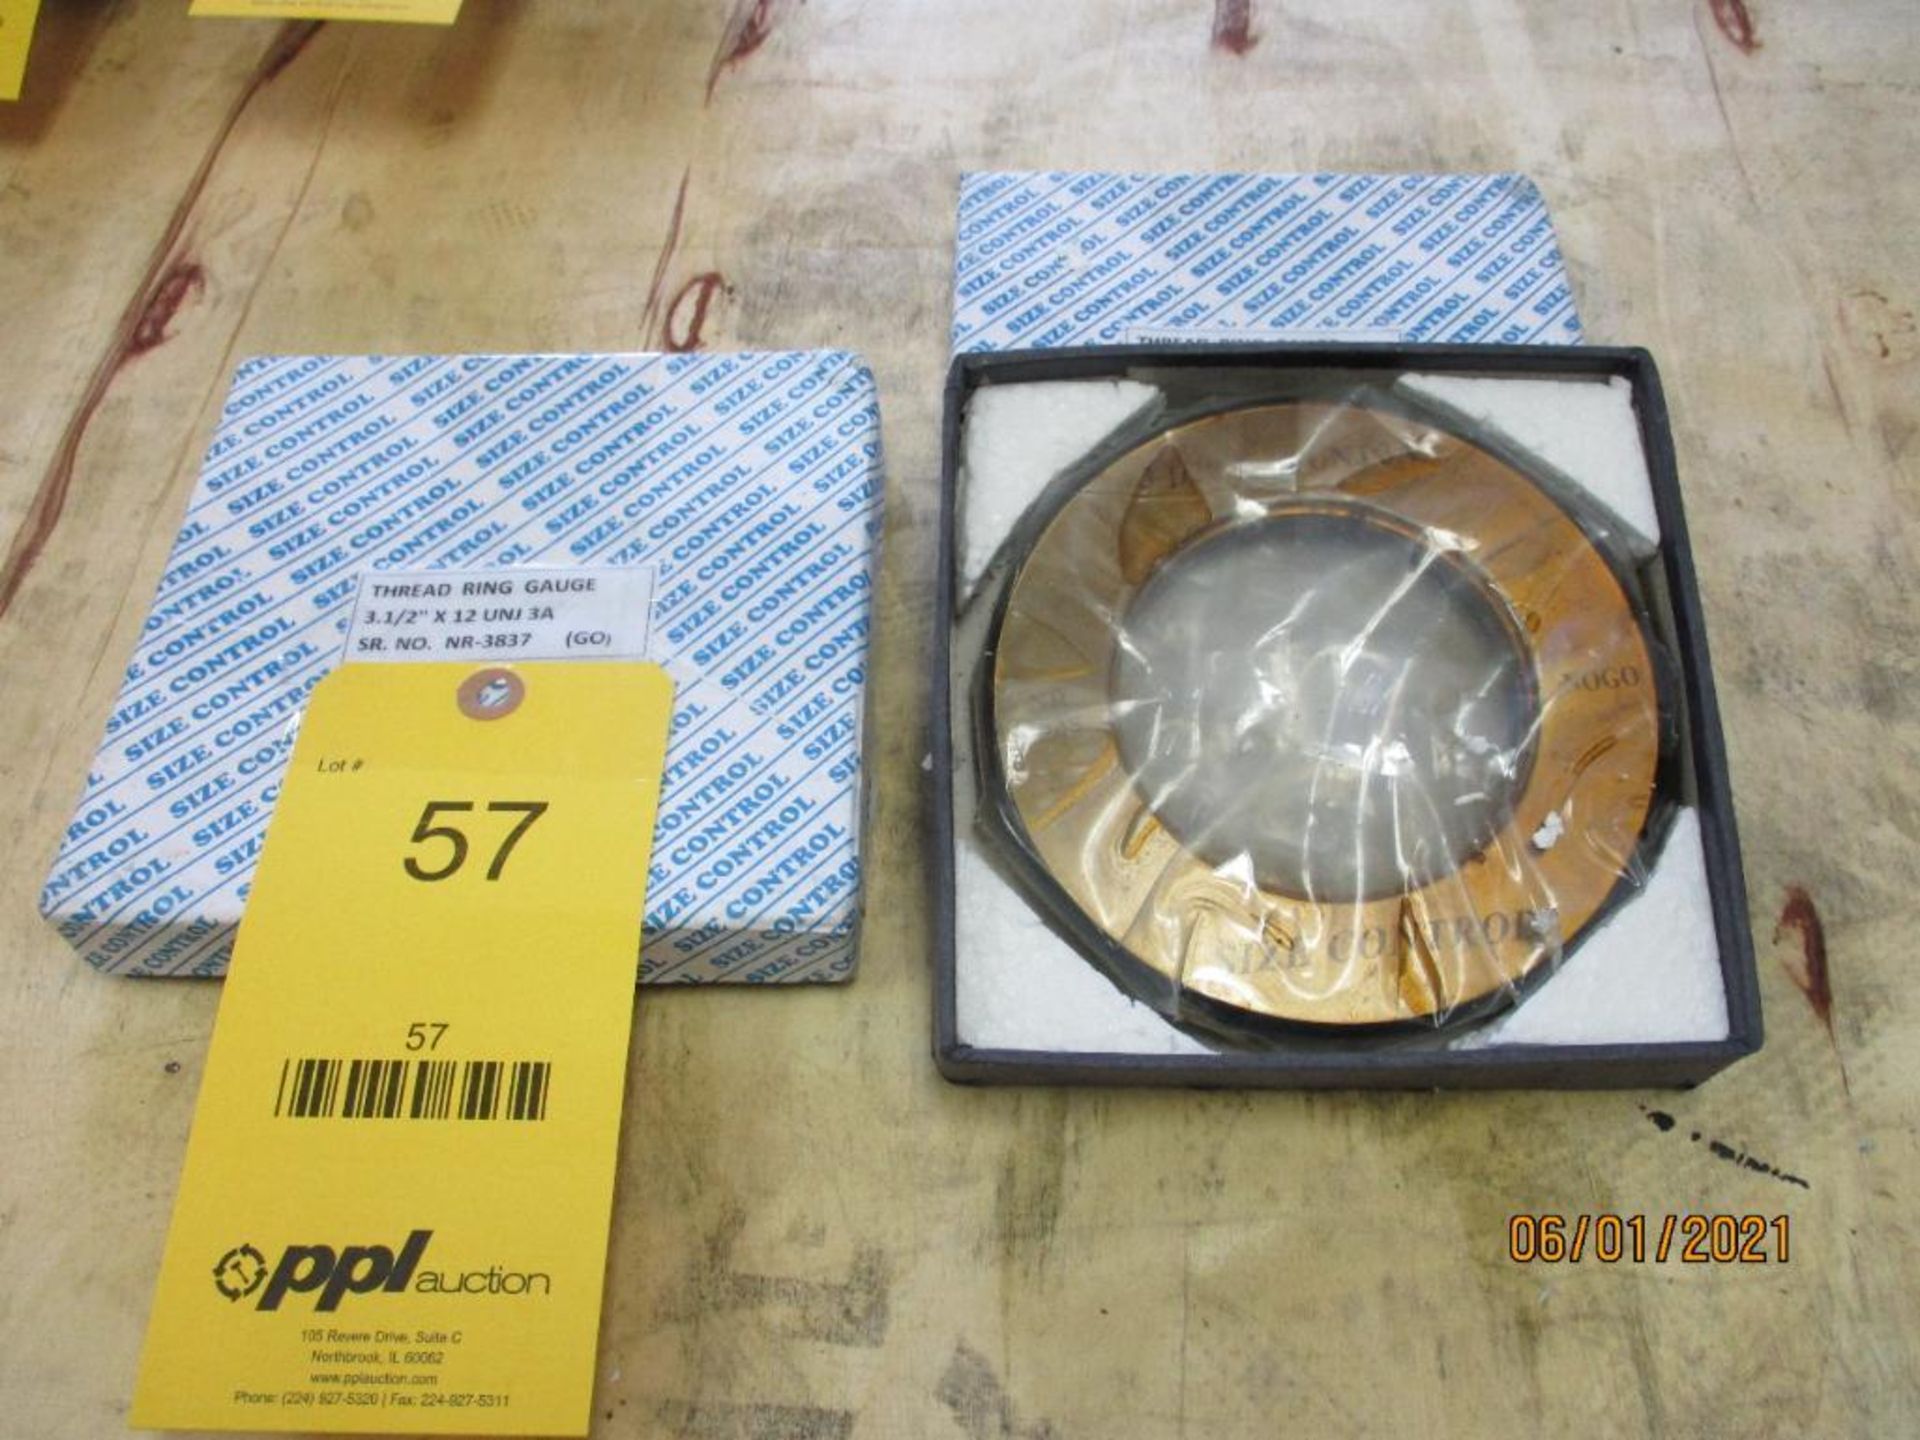 Set of GO/NOGO Thread Ring Gages, 3-1/2 in. - 12 UNJ-3A (All inspection eq. is like New and Mostly